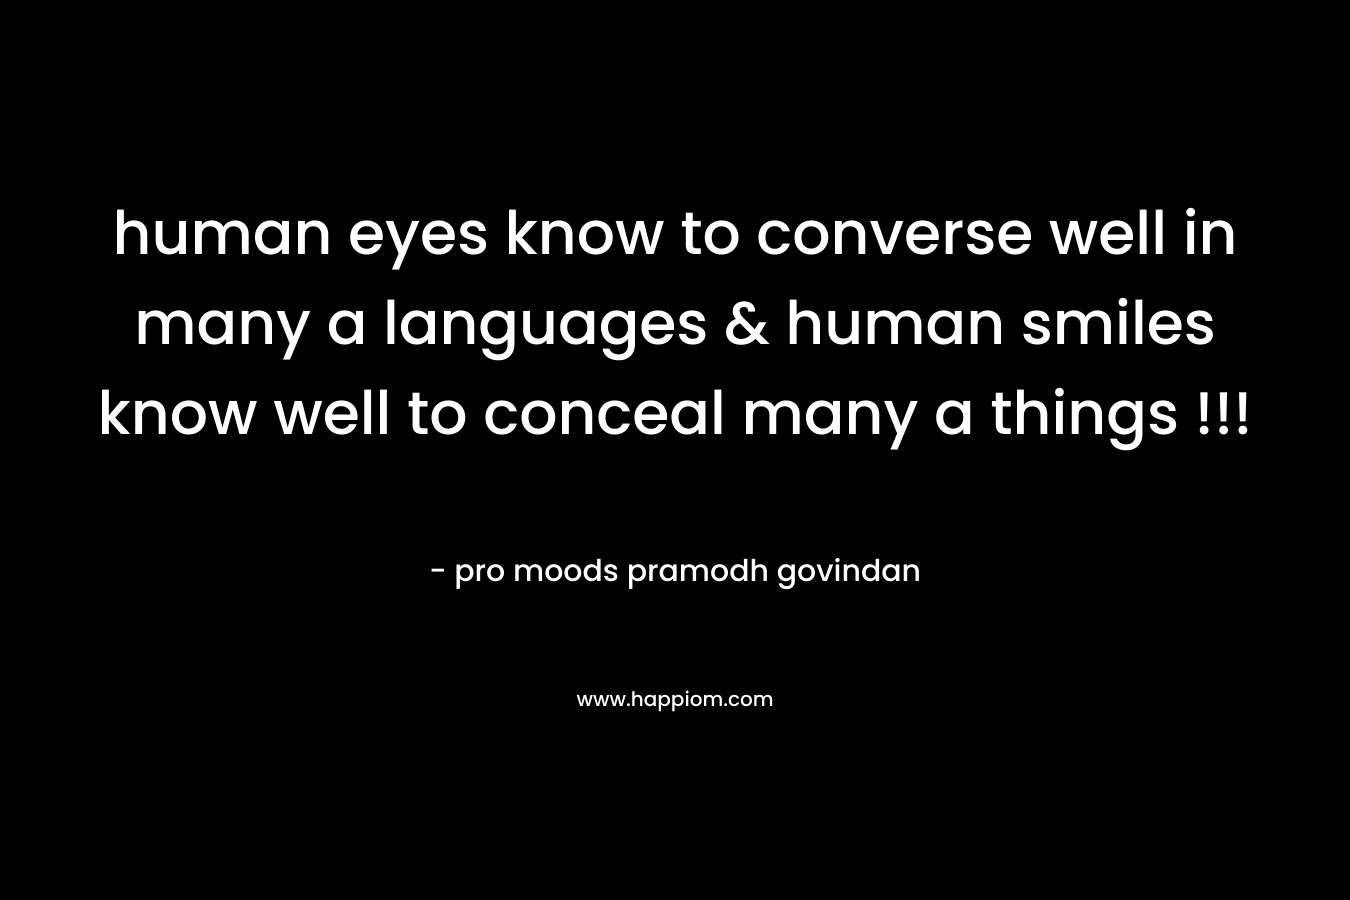 human eyes know to converse well in many a languages & human smiles know well to conceal many a things !!! – pro moods pramodh govindan